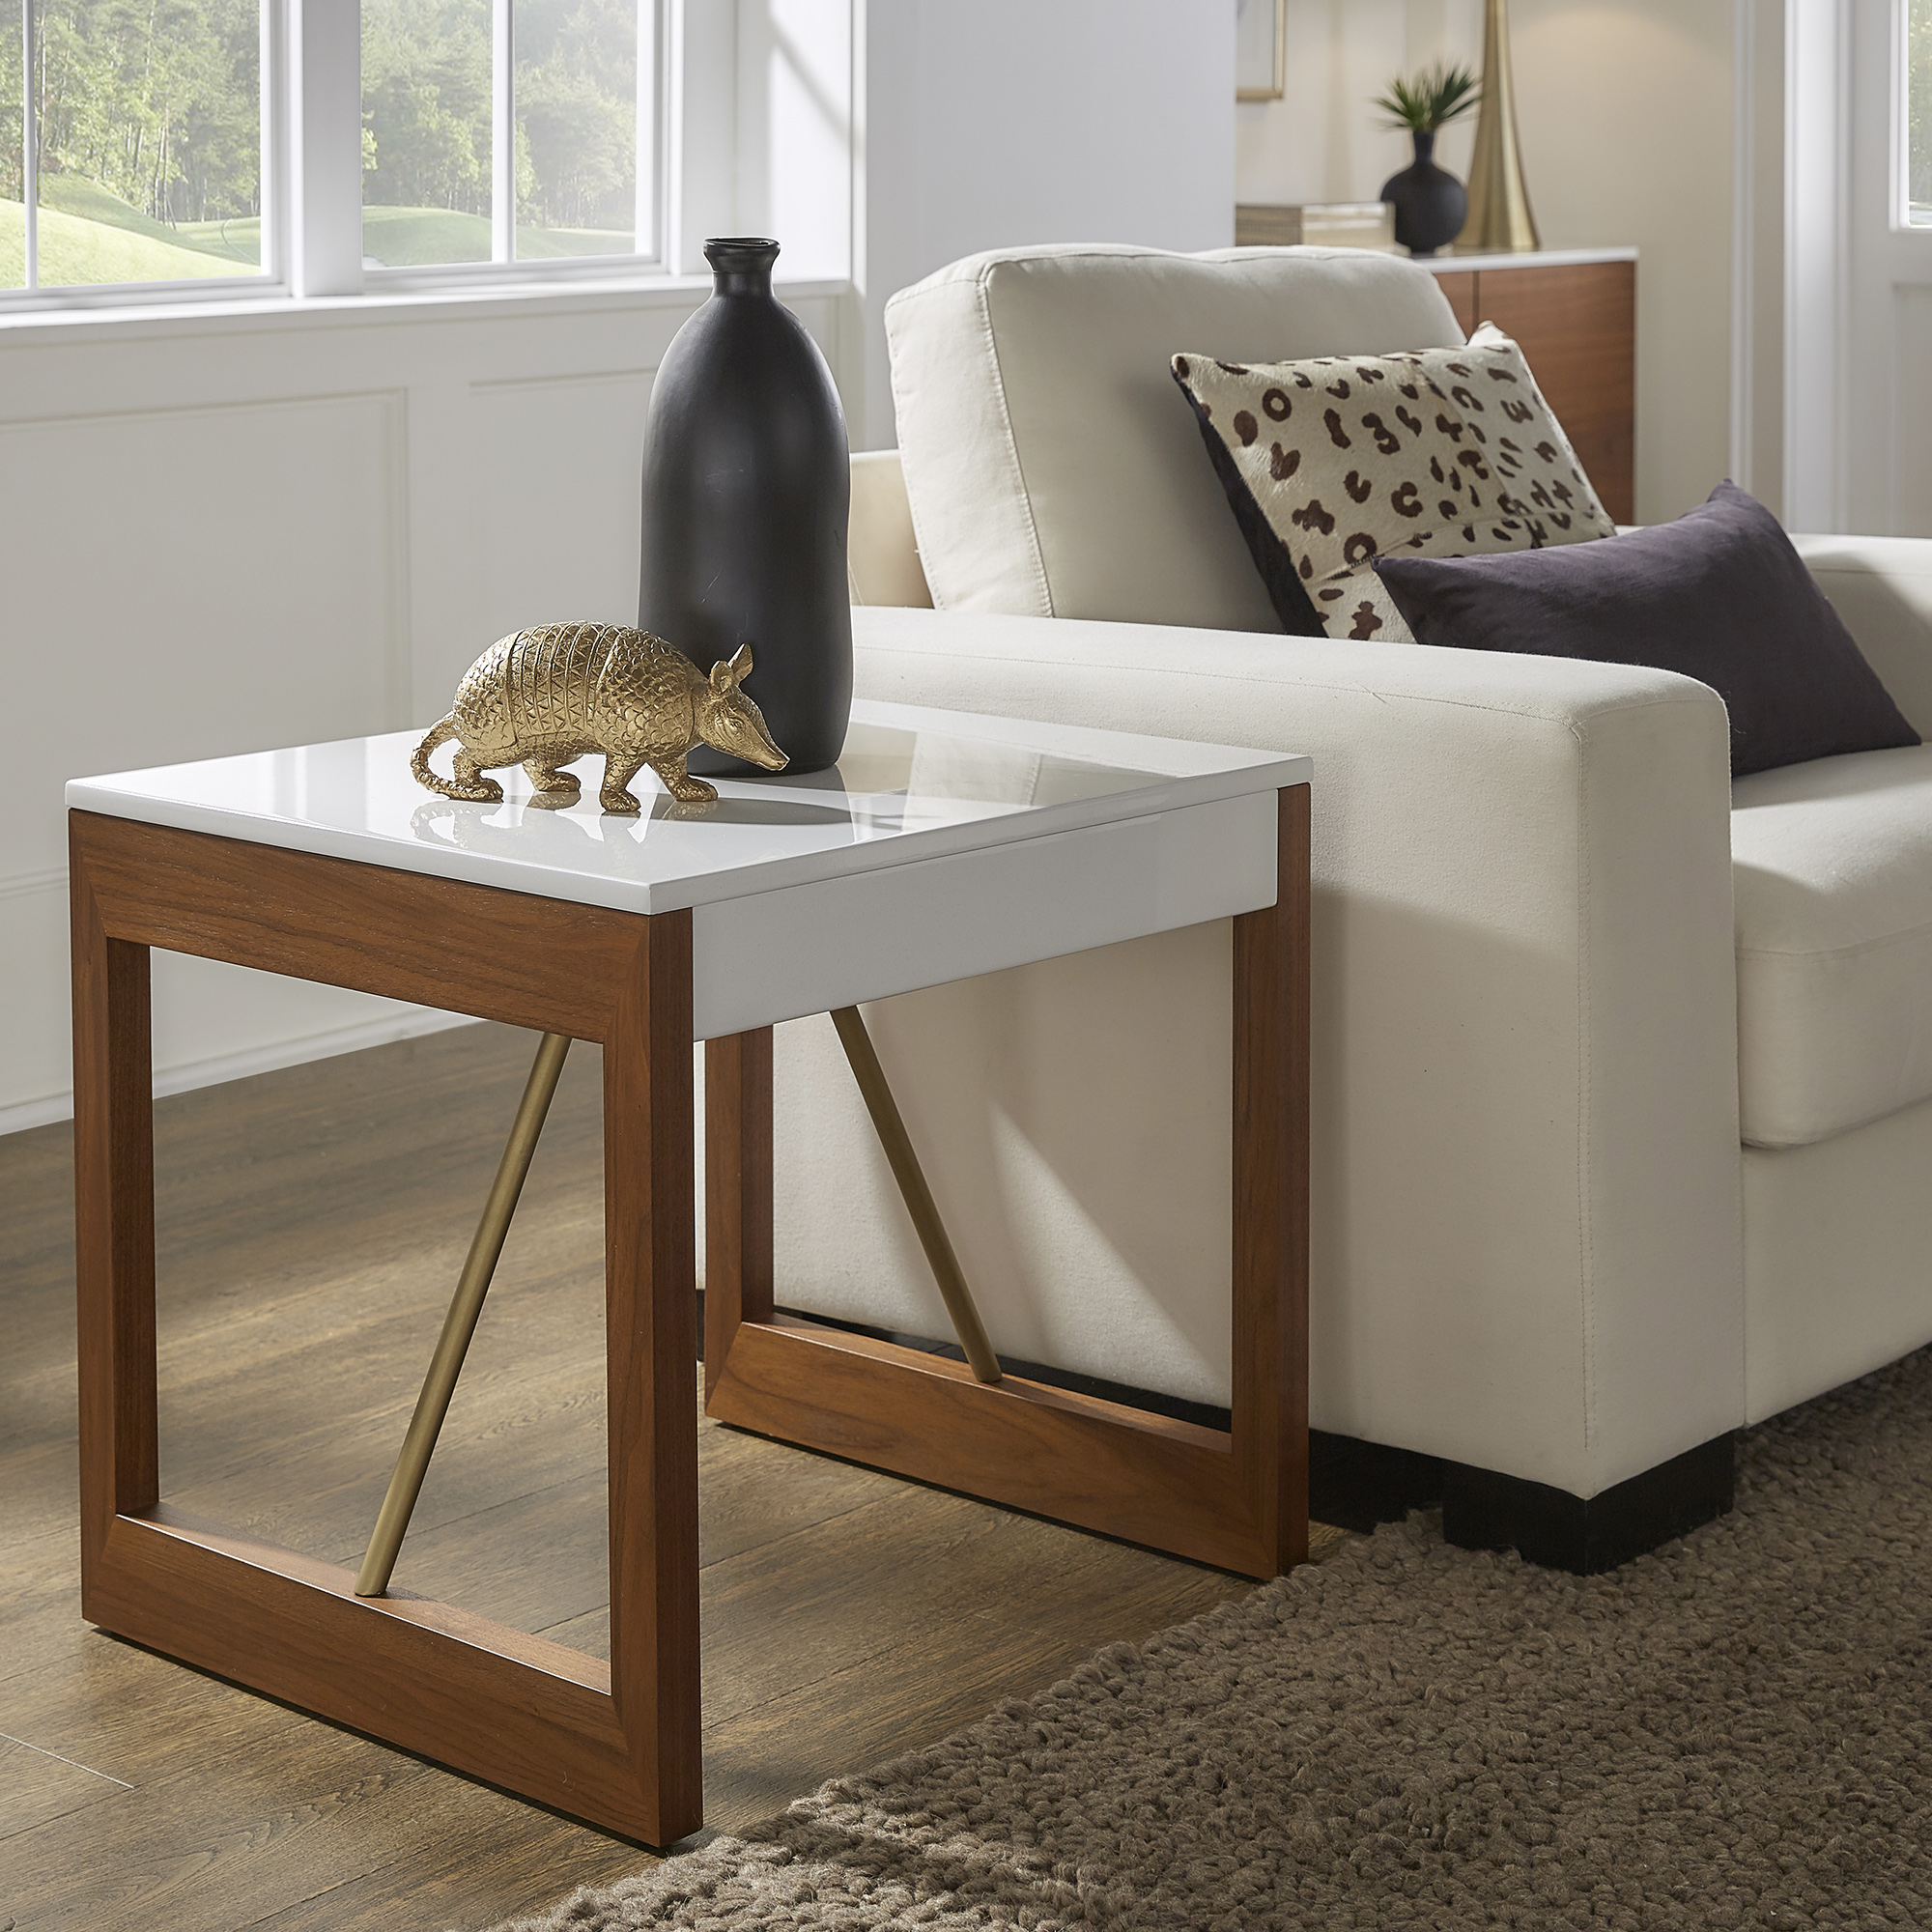 Two-Tone High Gloss White and Walnut Finish End Table